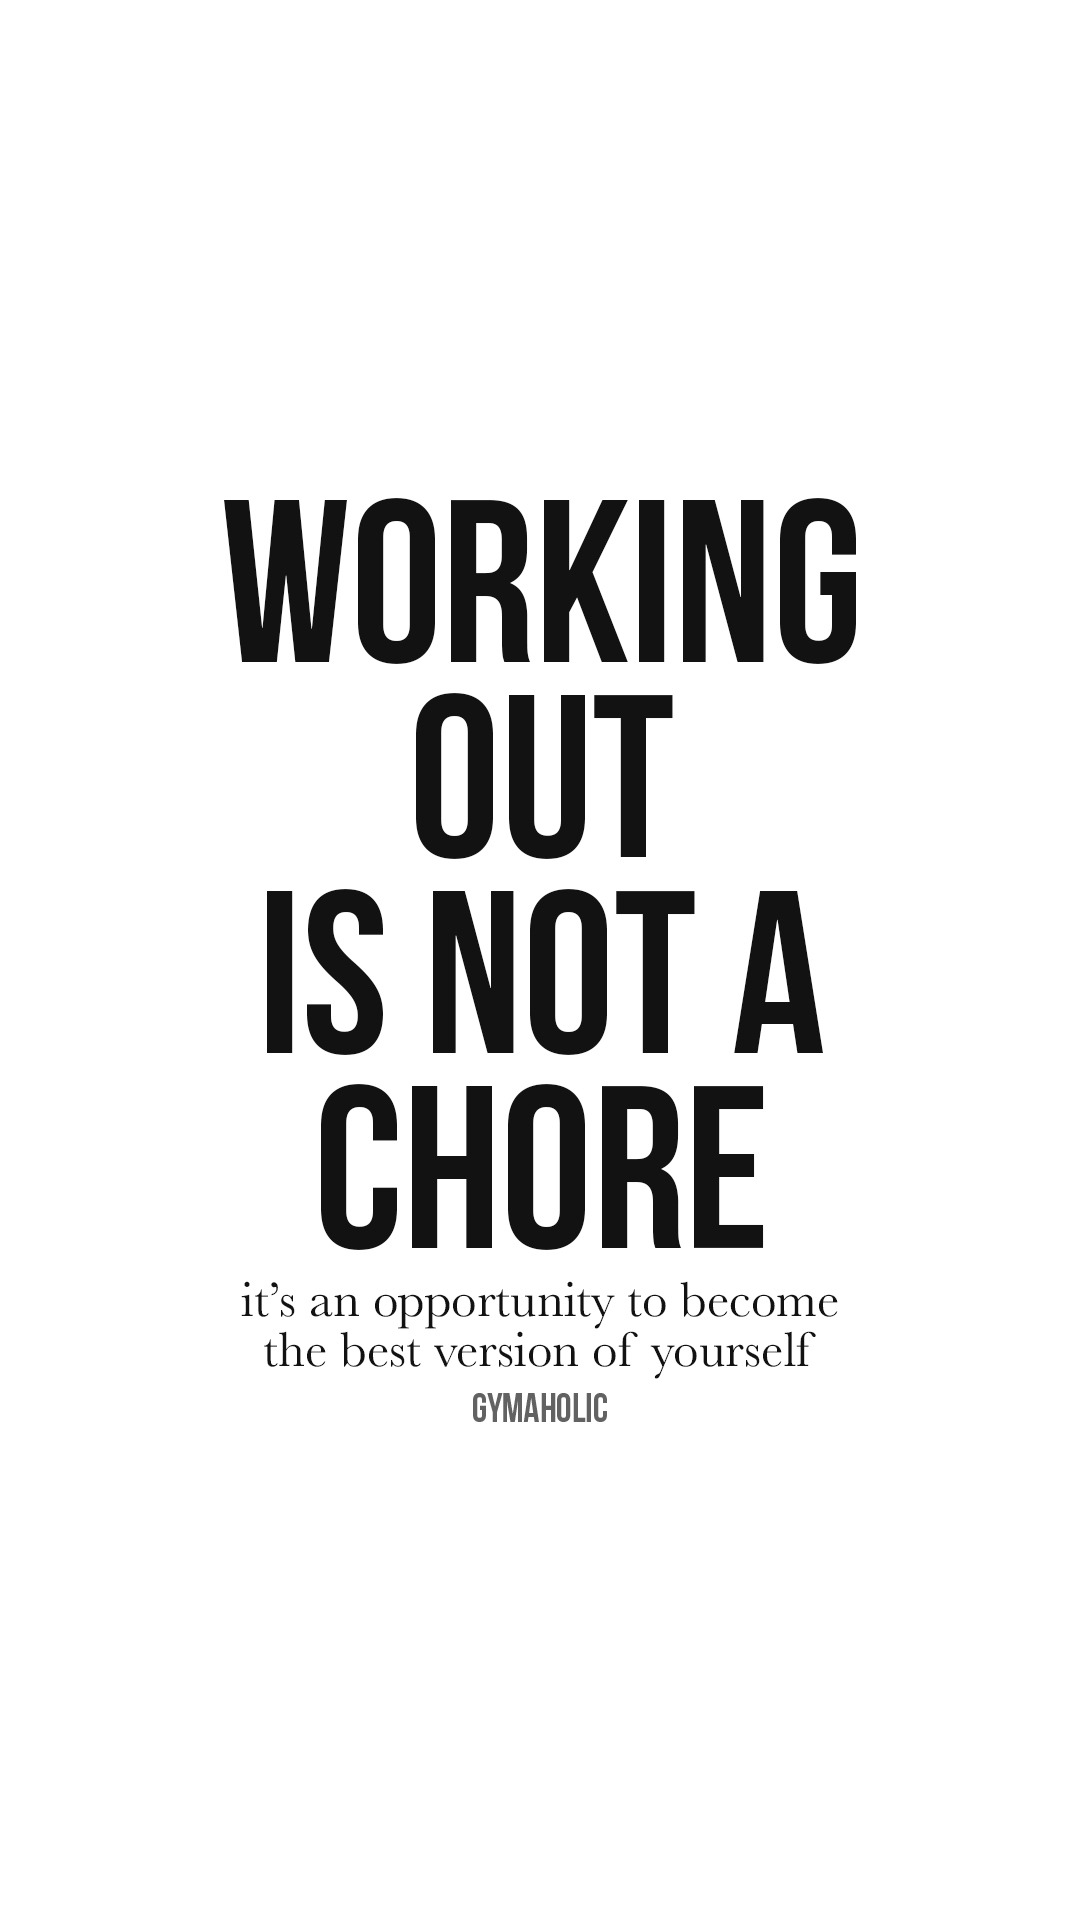 Working out is not a chore